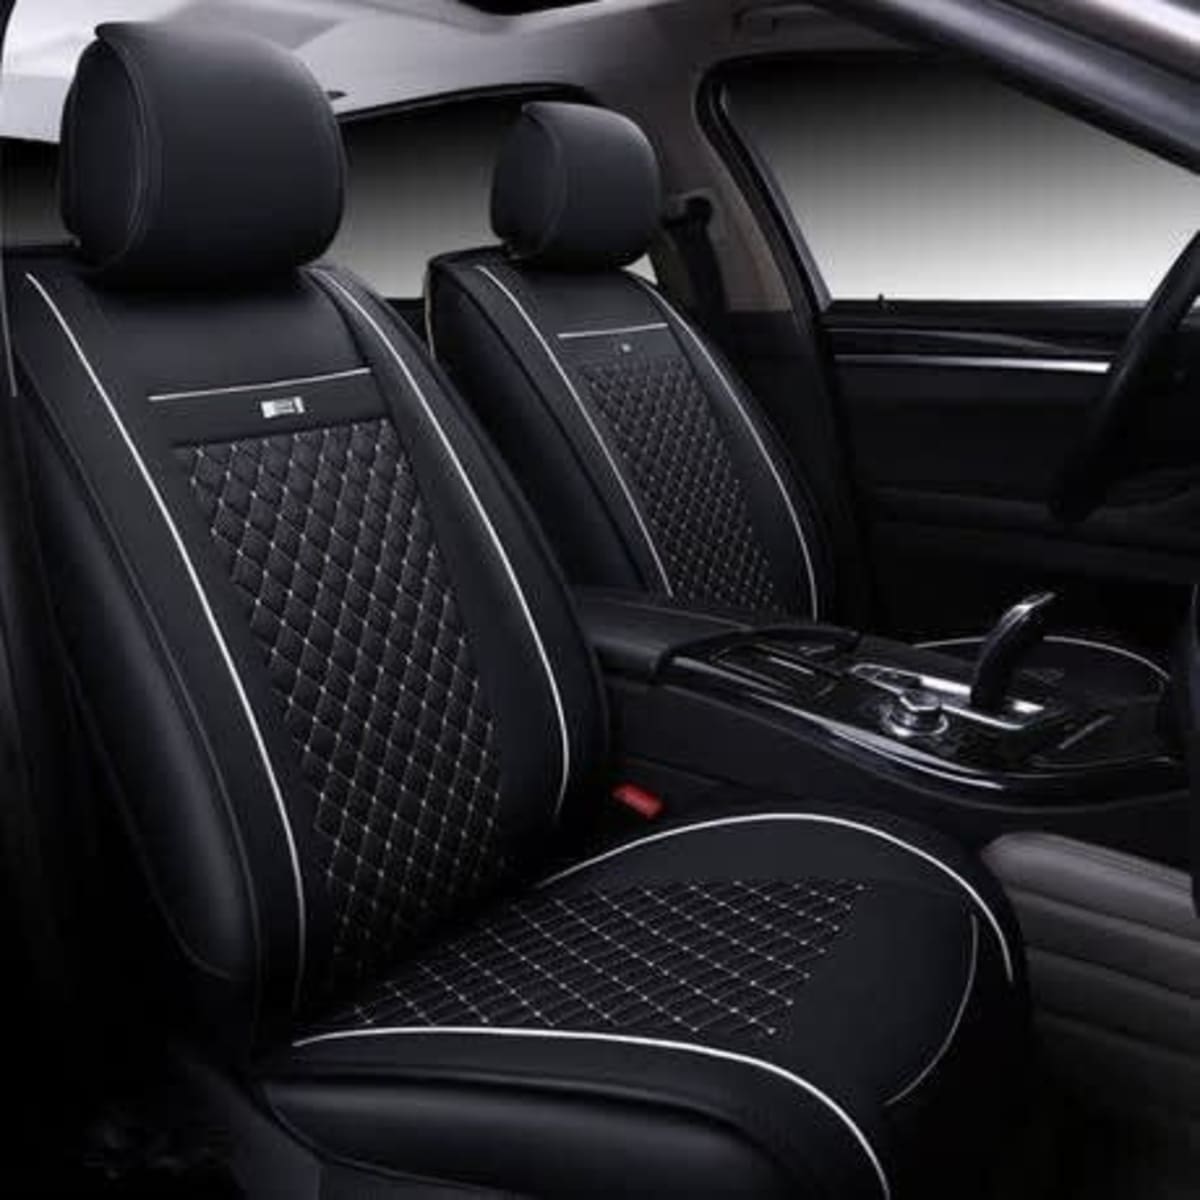 Executive Premium Car Seat Covers with PU Leather for Front & Rear Sea –